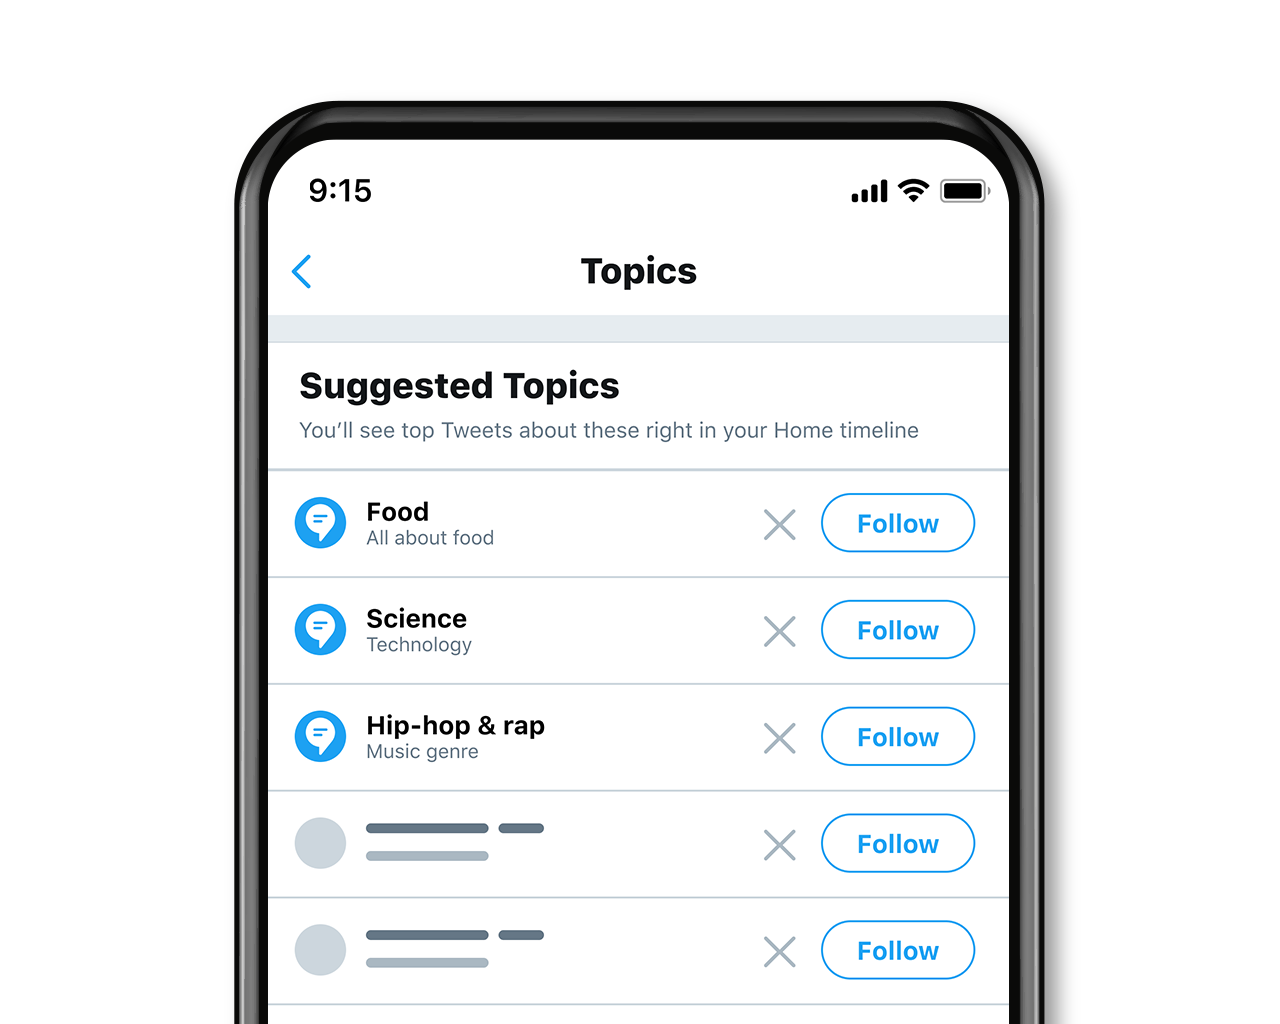 The Topics page on the Twitter mobile app